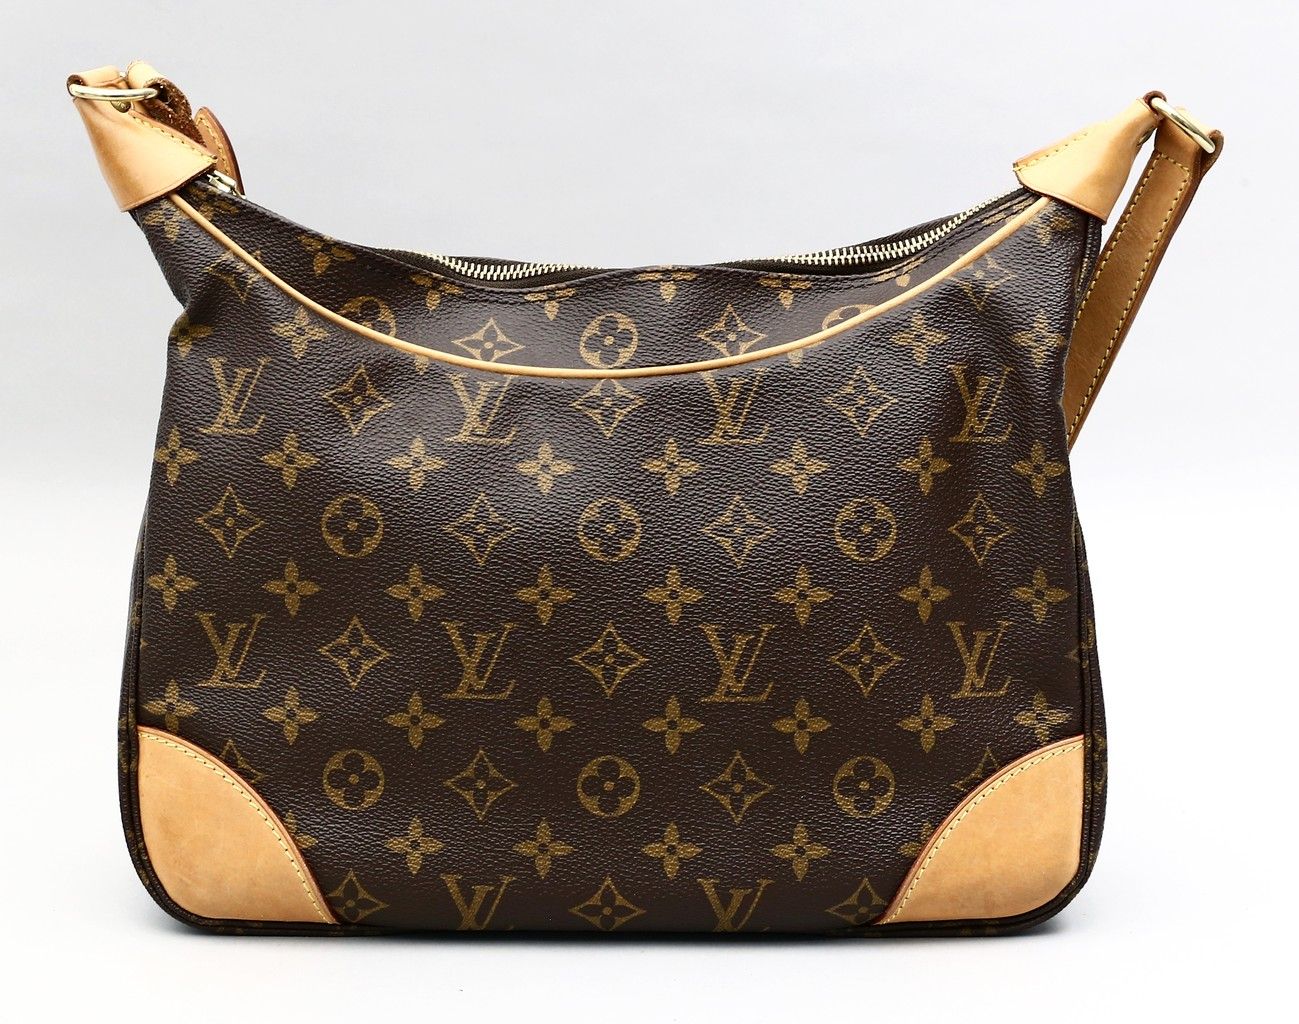 Tasche "Boulogne 30", Louis Vuitton. Monogram canvas with contrasting yellow sti&hellip;